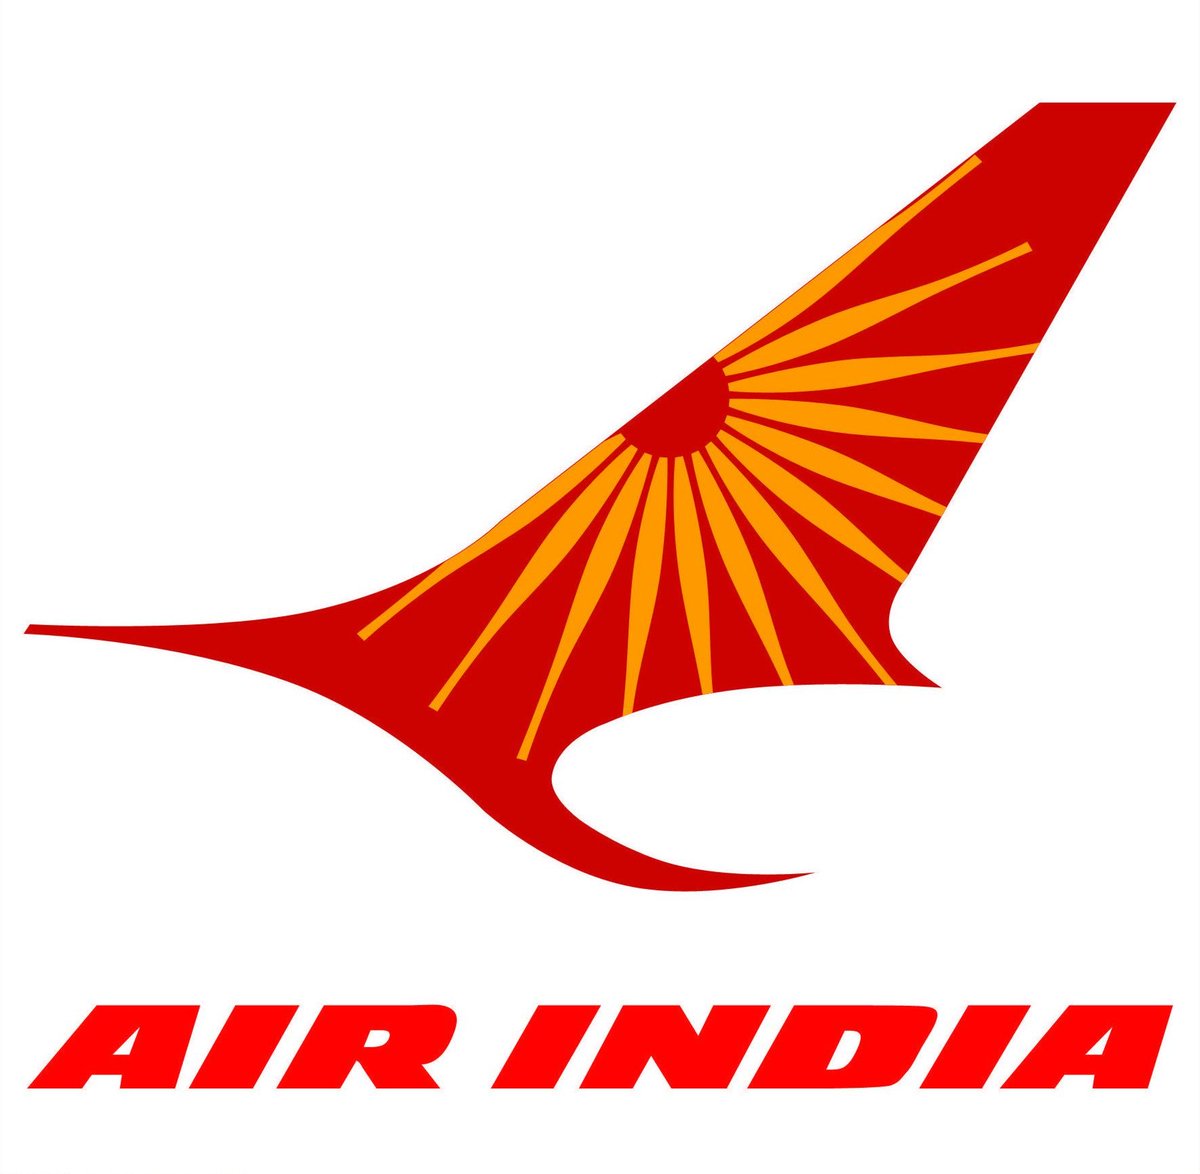 Air India8/10, typeface has extremely cool 70s vibes